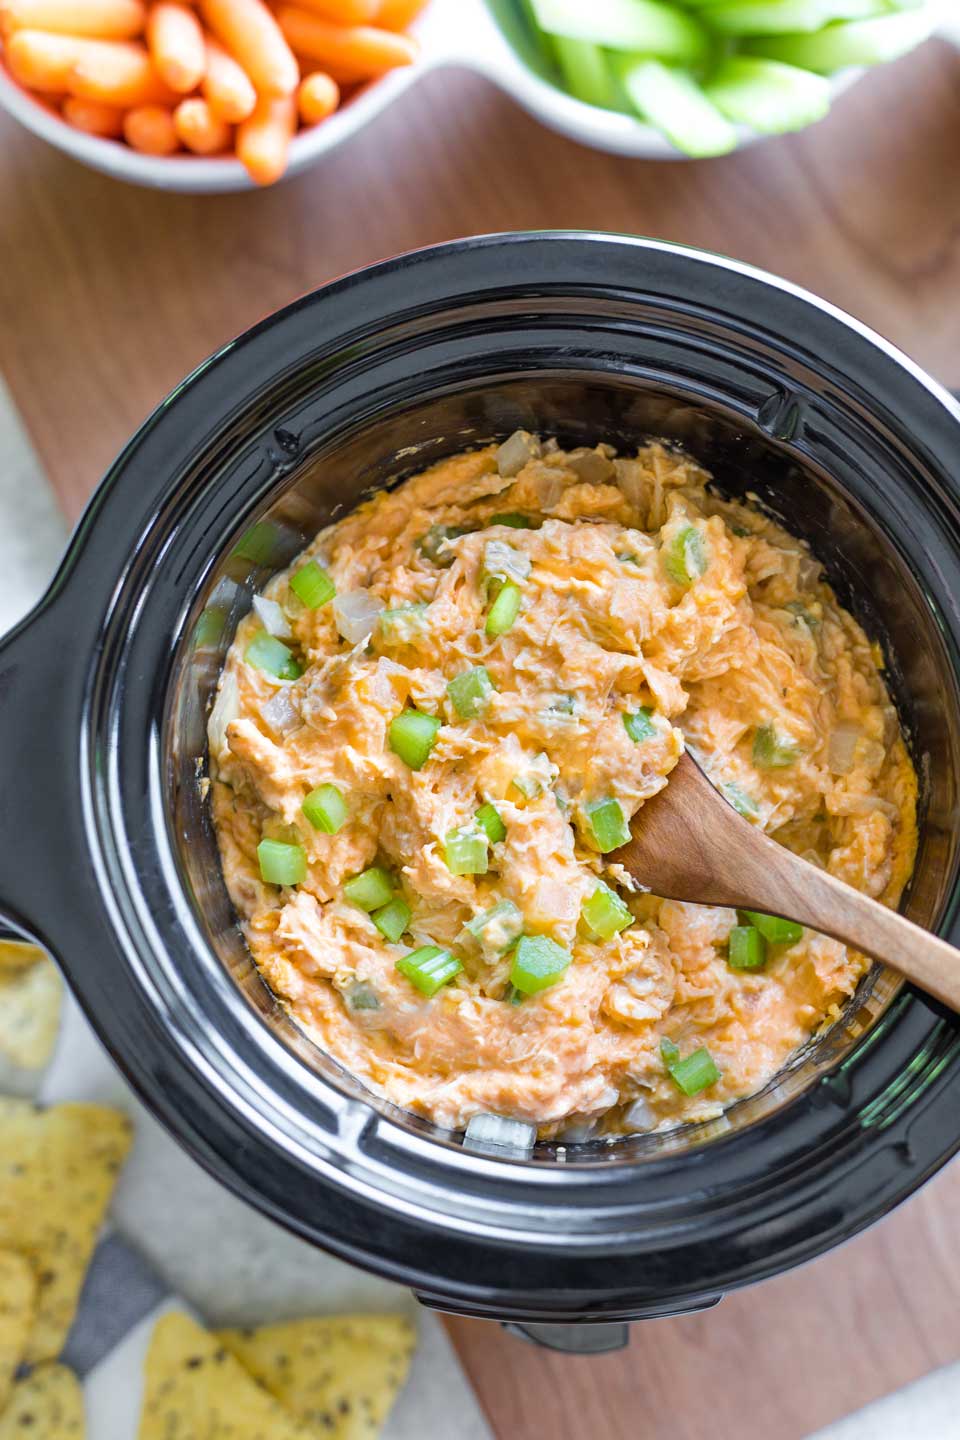 Wooden spoon stirring veggies into cooked buffalo chicken dip.